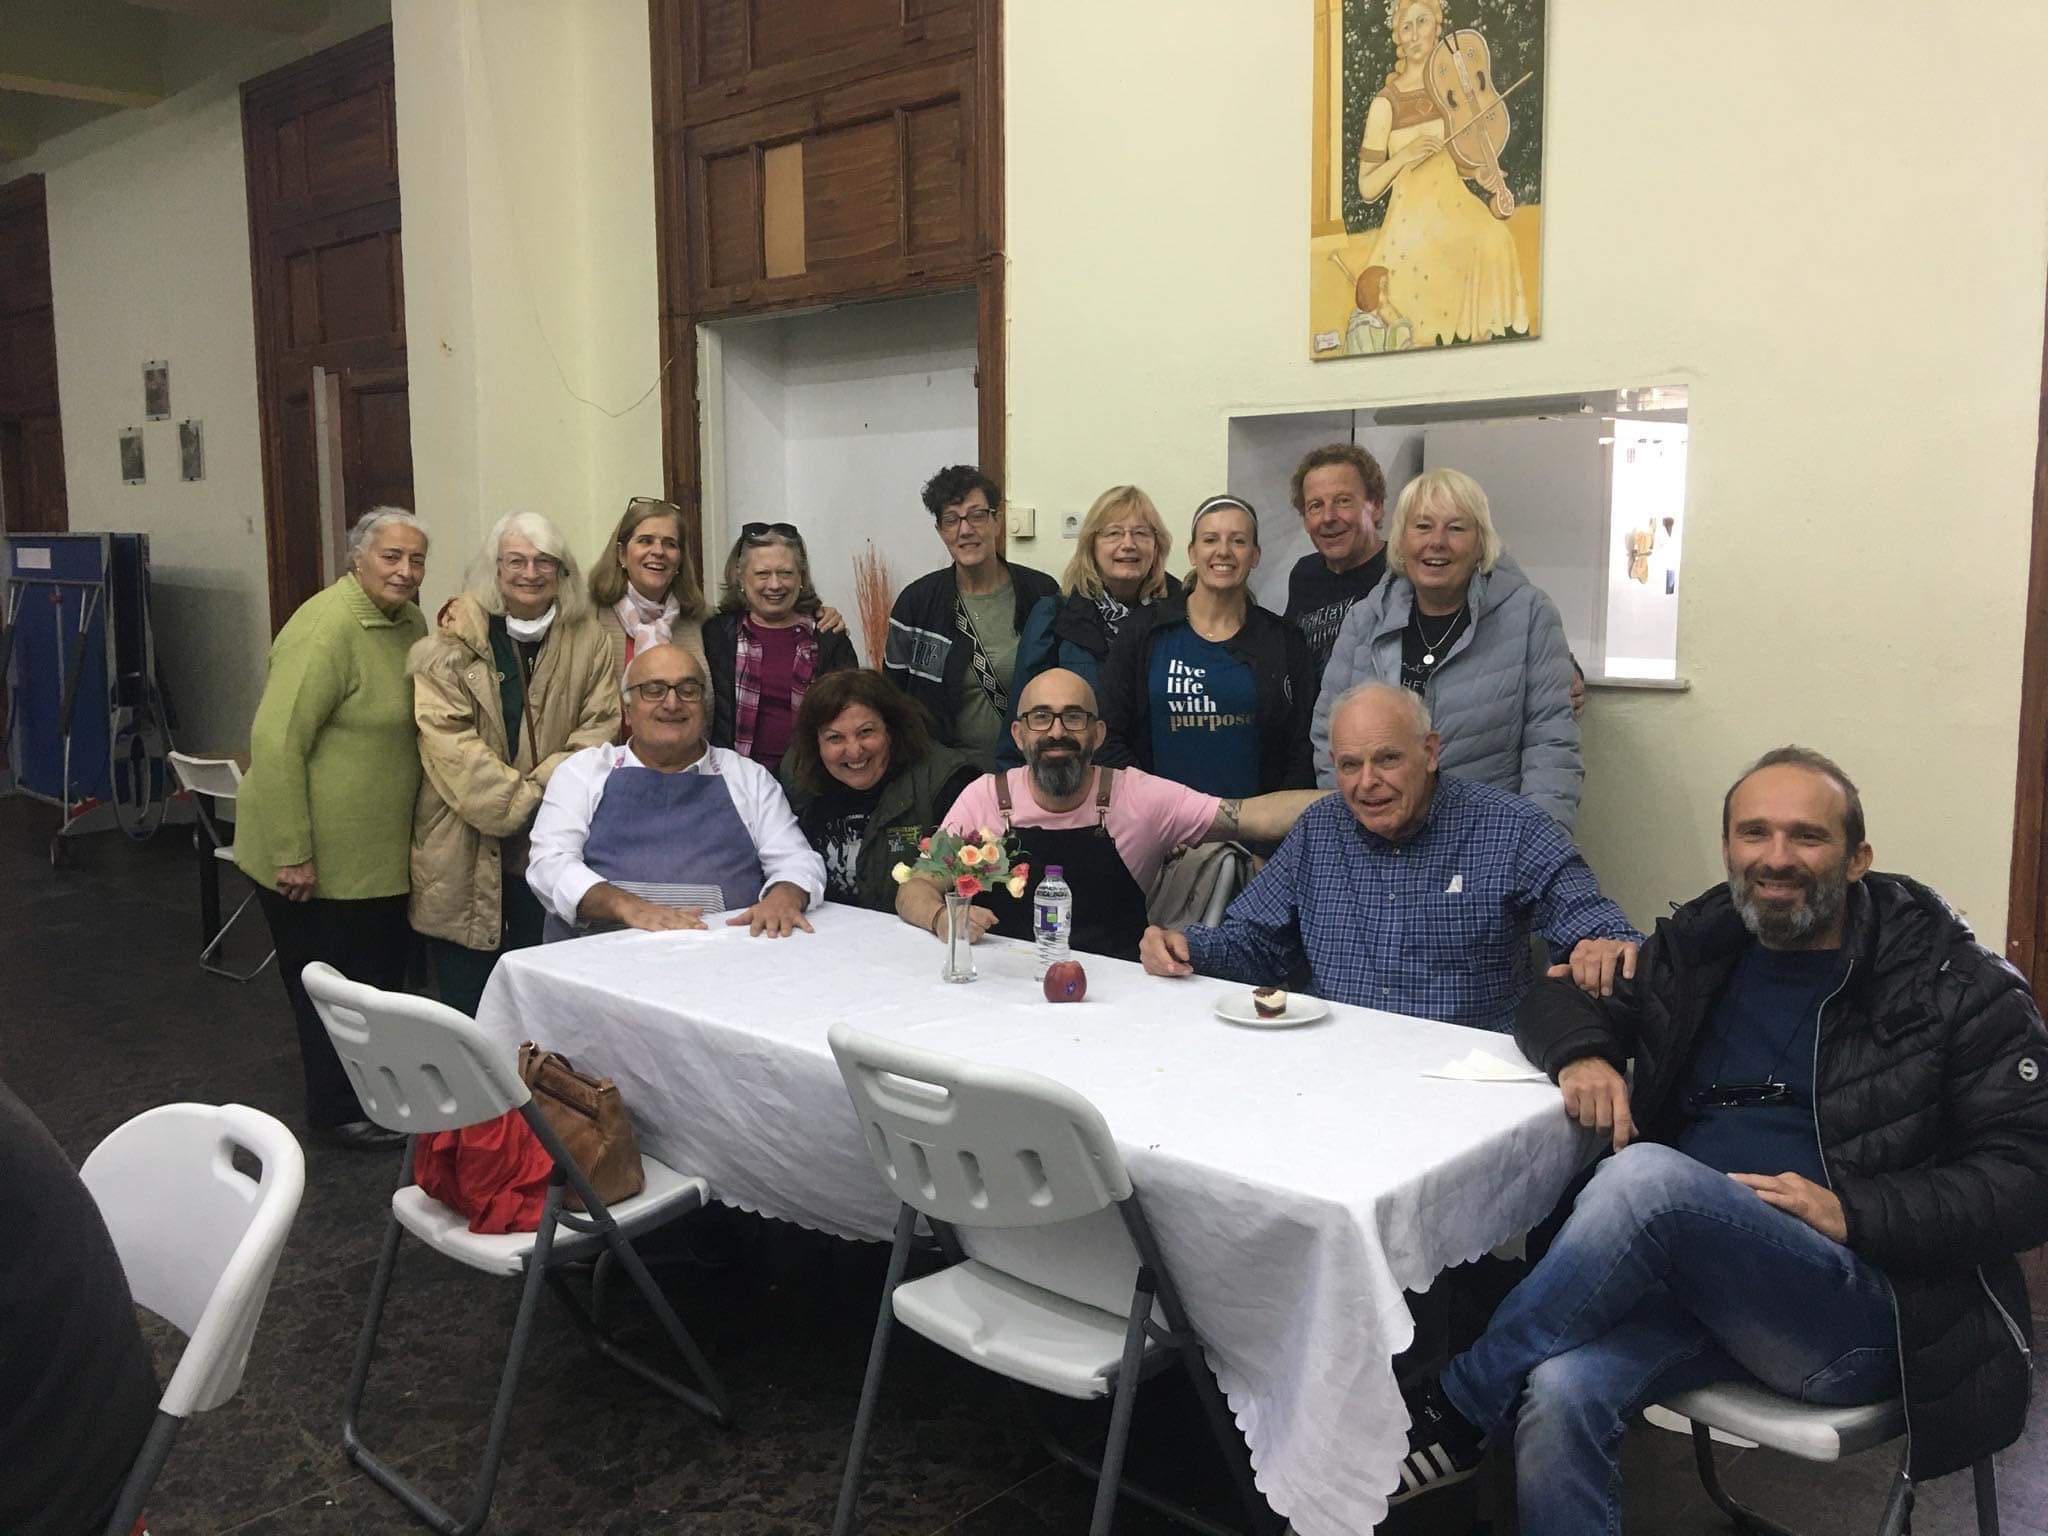 FPC Moorestown helped prepare the meal to feed needy friends in Katerini.